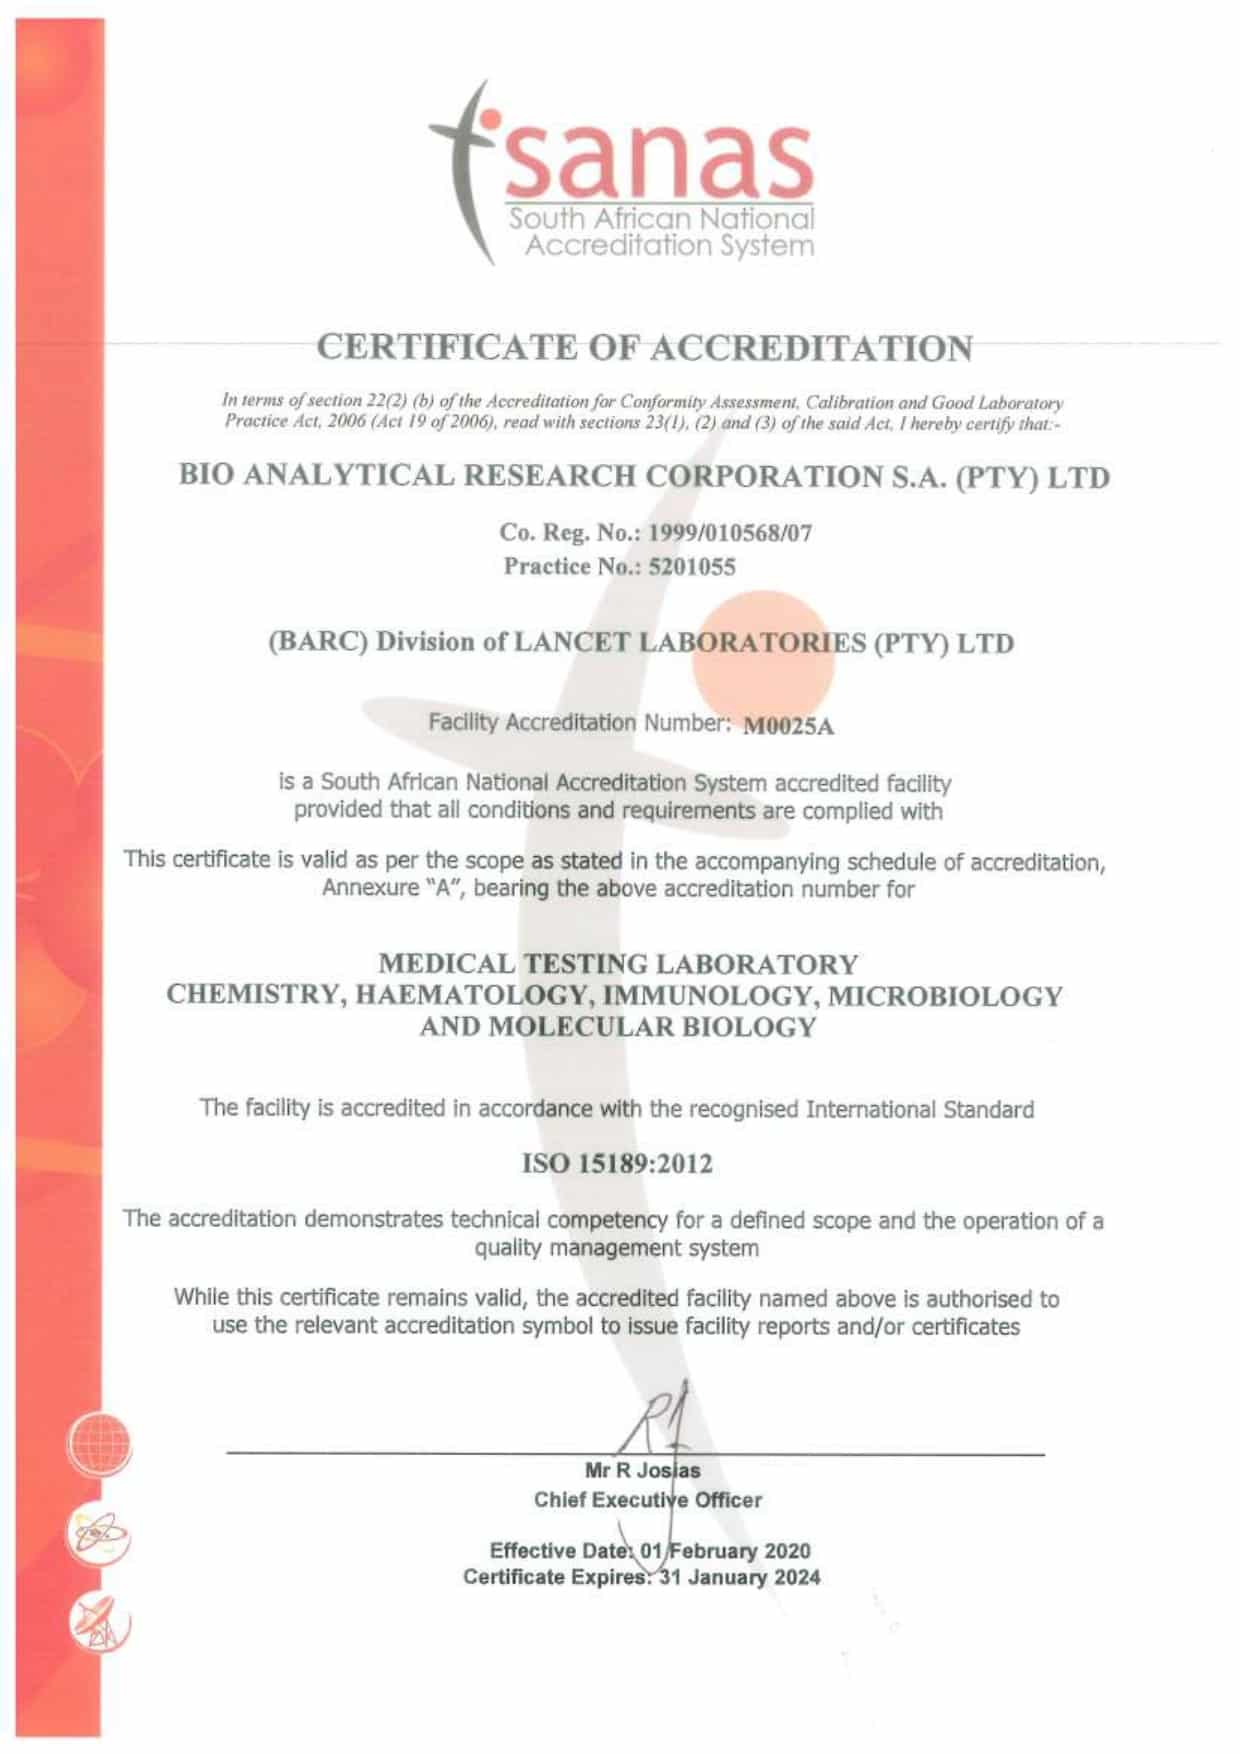 Cerba Research - Certification - Sanas Certificate of Accreditation- Bio Analytical Research Corporation_page-0001